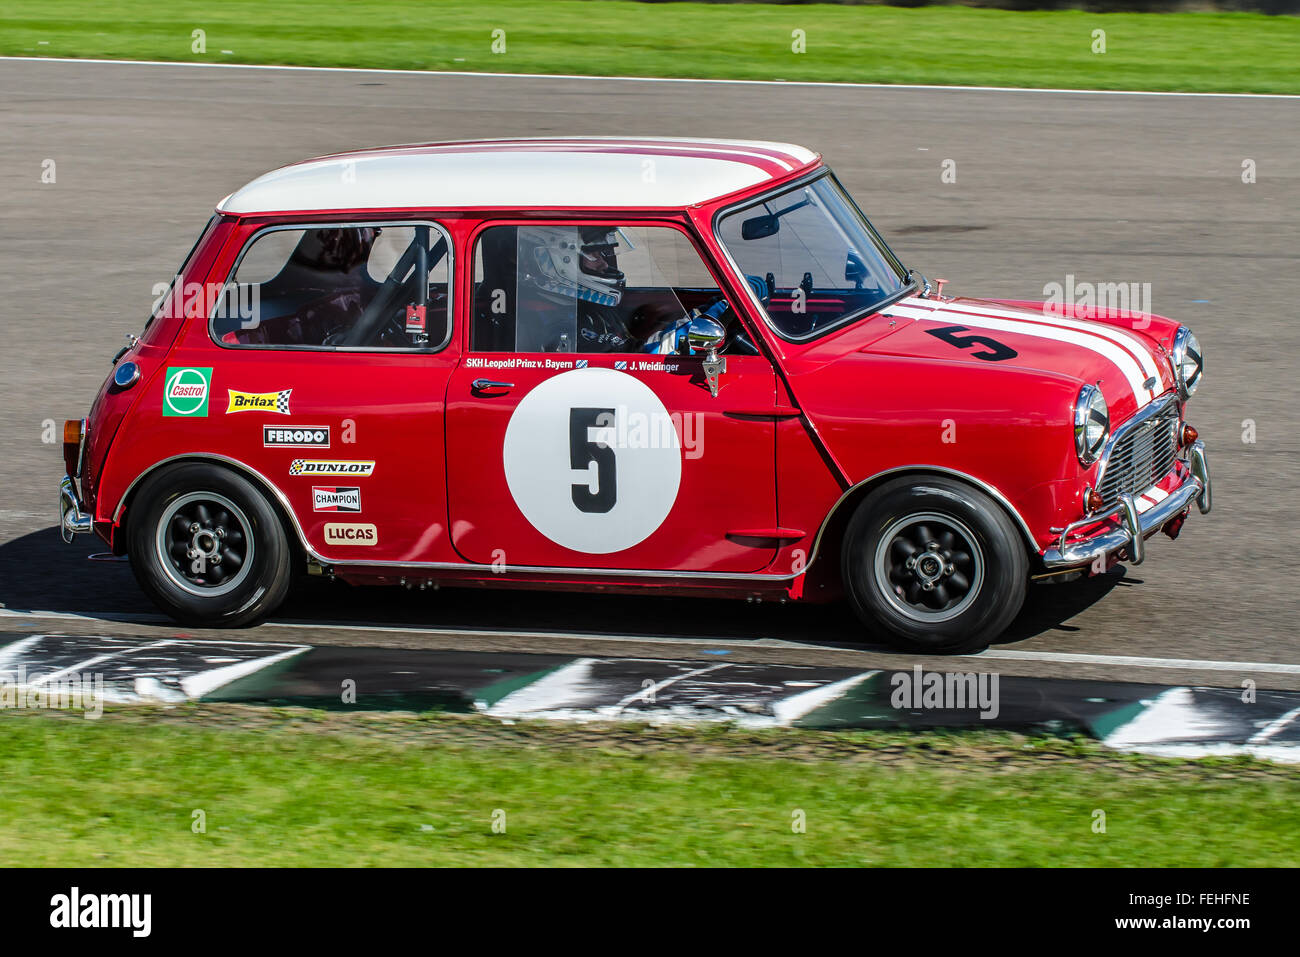 1964 Austin Mini Cooper S is owned by BMW Group and was raced by Leopold Prinz von Bayern at the 2015 Goodwood Revival Stock Photo